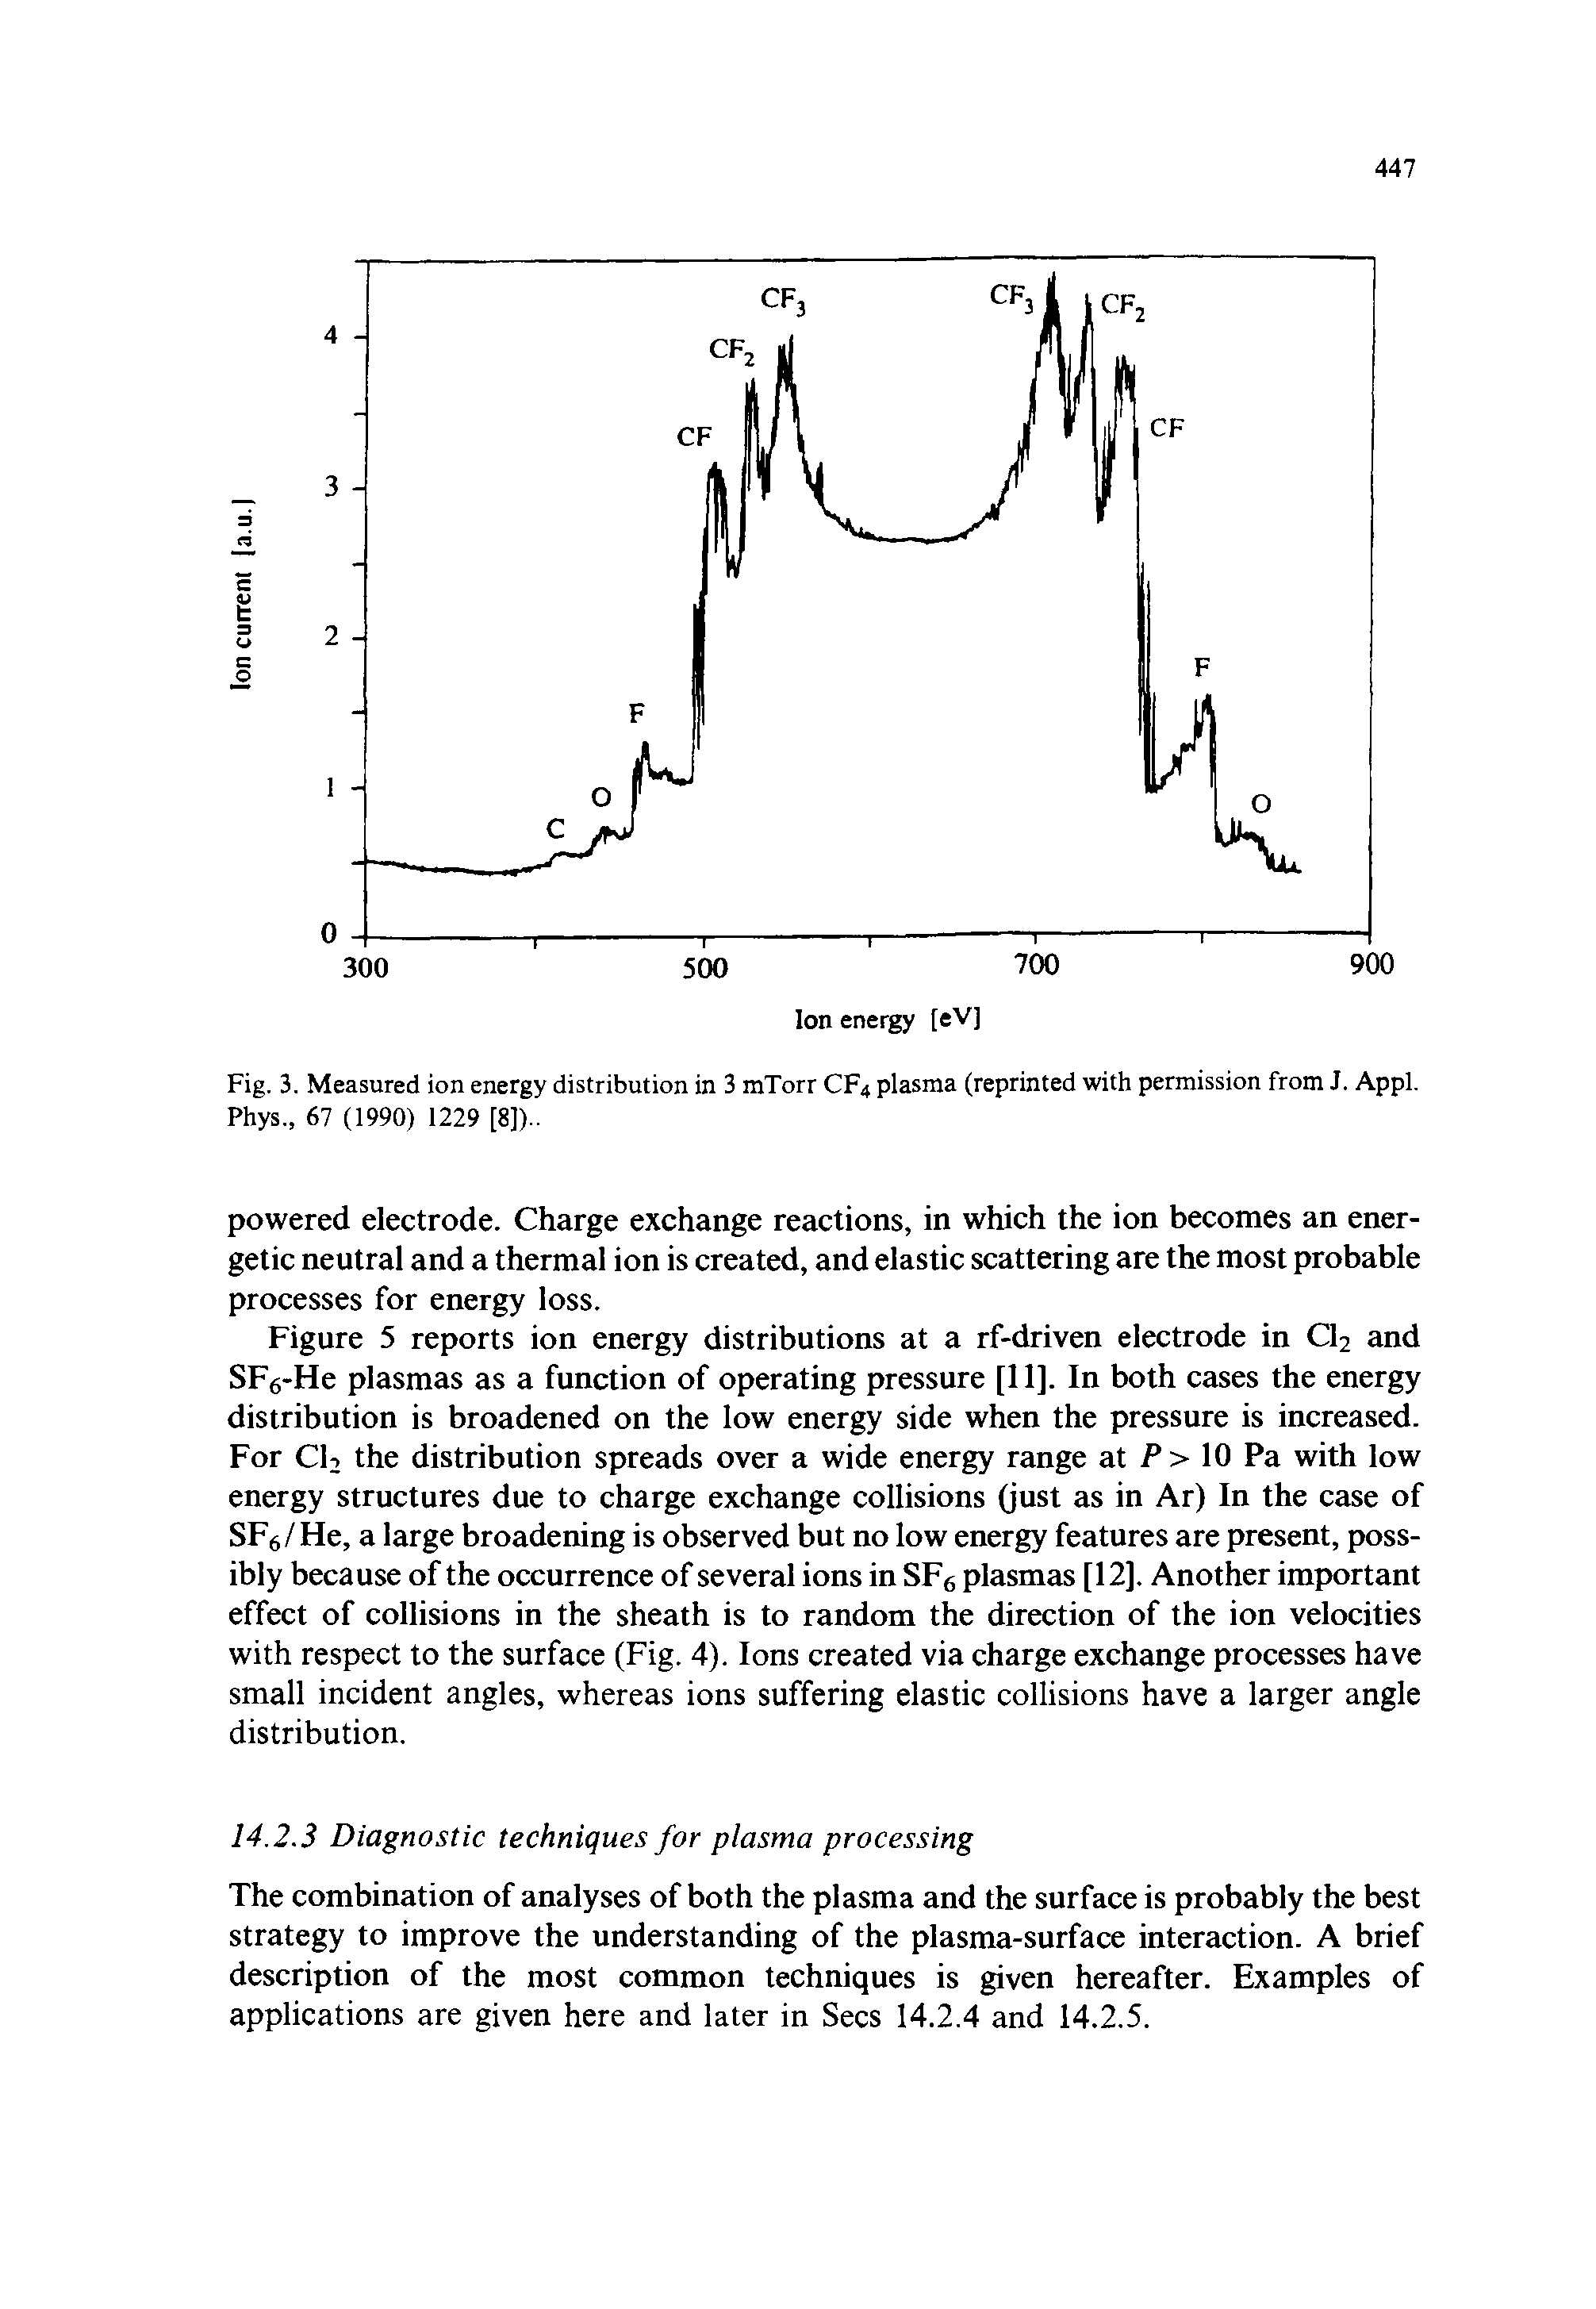 Fig. 3. Measured ion energy distribution in 3 mTorr CF4 plasma (reprinted with permission from J. Appl. Phys., 67 (1990) 1229 [8])..